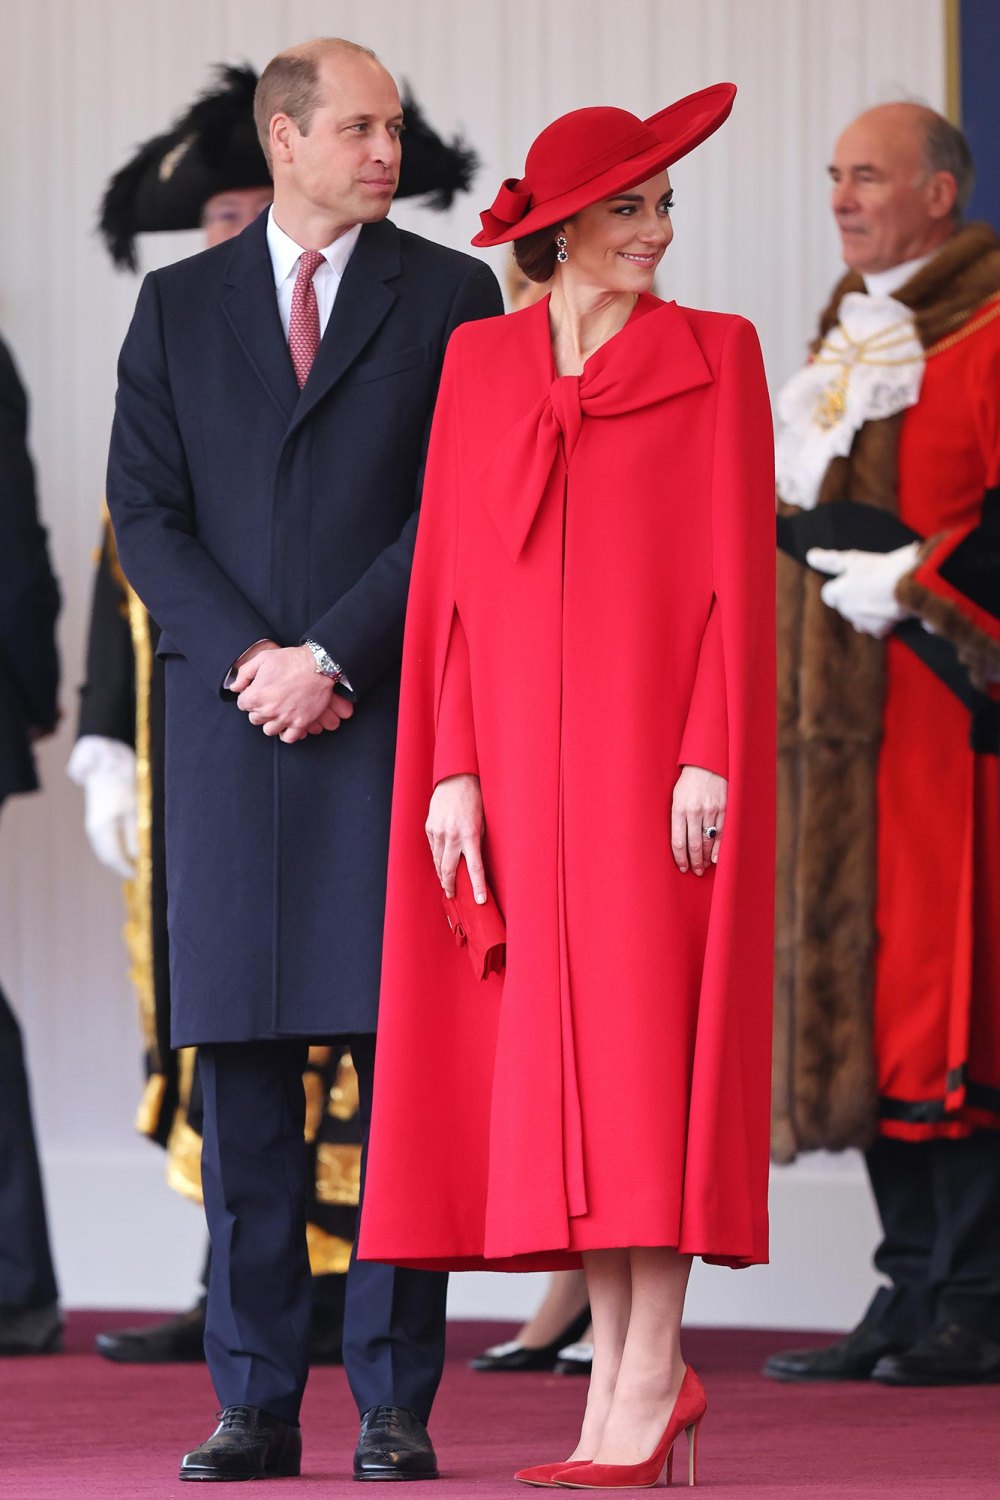 Kate Middleton Looks Festive in Red Statement Coat to Greet the South Korean President and His Wife 2